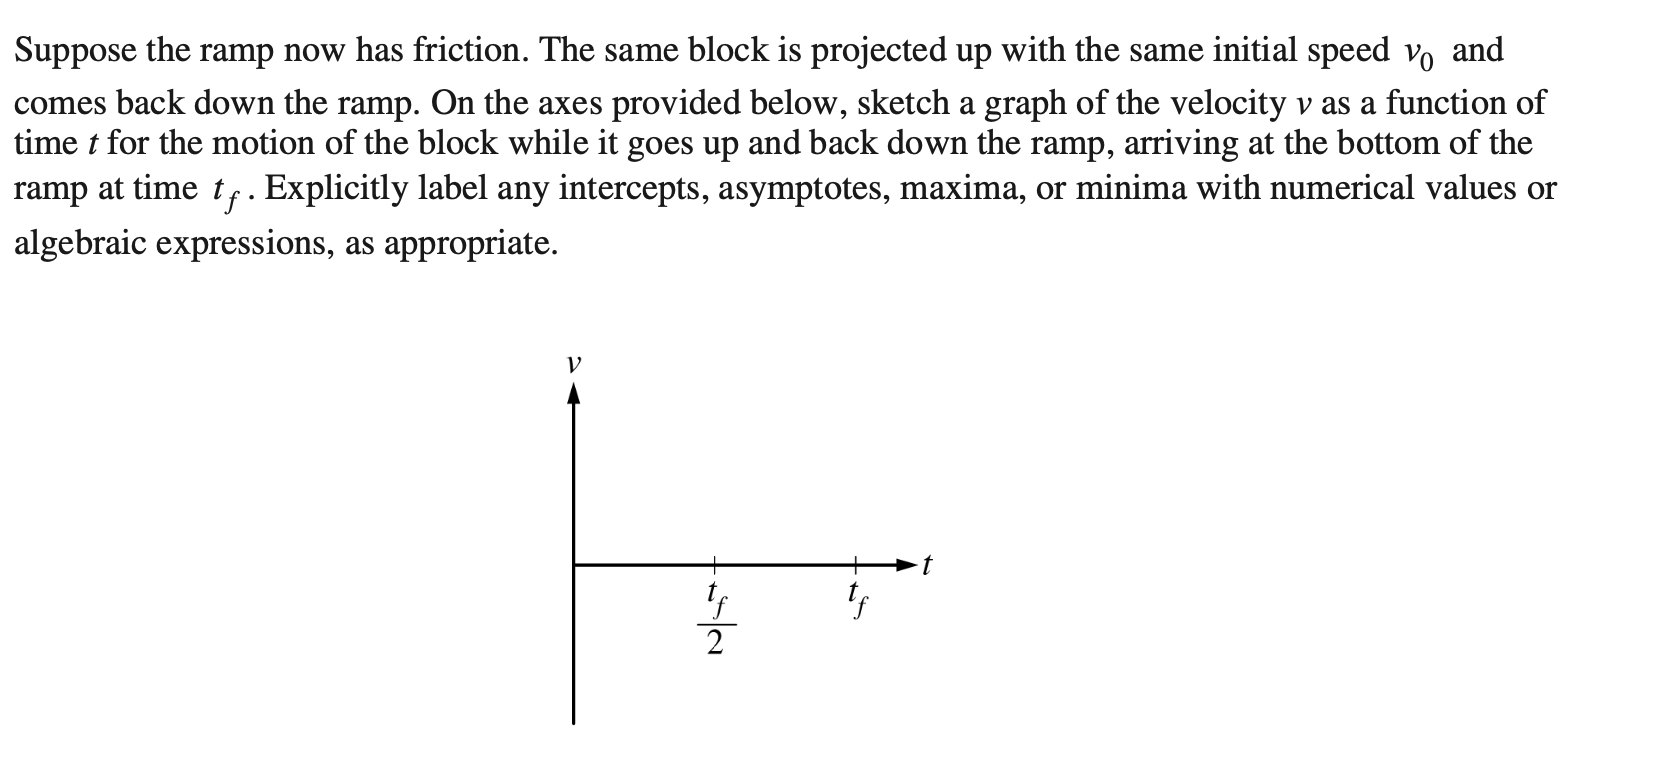 Suppose the ramp now has friction. The same block is projected up with the same initial speed vo and
comes back down the ramp. On the axes provided below, sketch a graph of the velocity v as a function of
time t for the motion of the block while it goes up and back down the ramp, arriving at the bottom of the
ramp at time t,. Explicitly label any intercepts, asymptotes, maxima, or minima with numerical values or
algebraic expressions, as appropriate.
